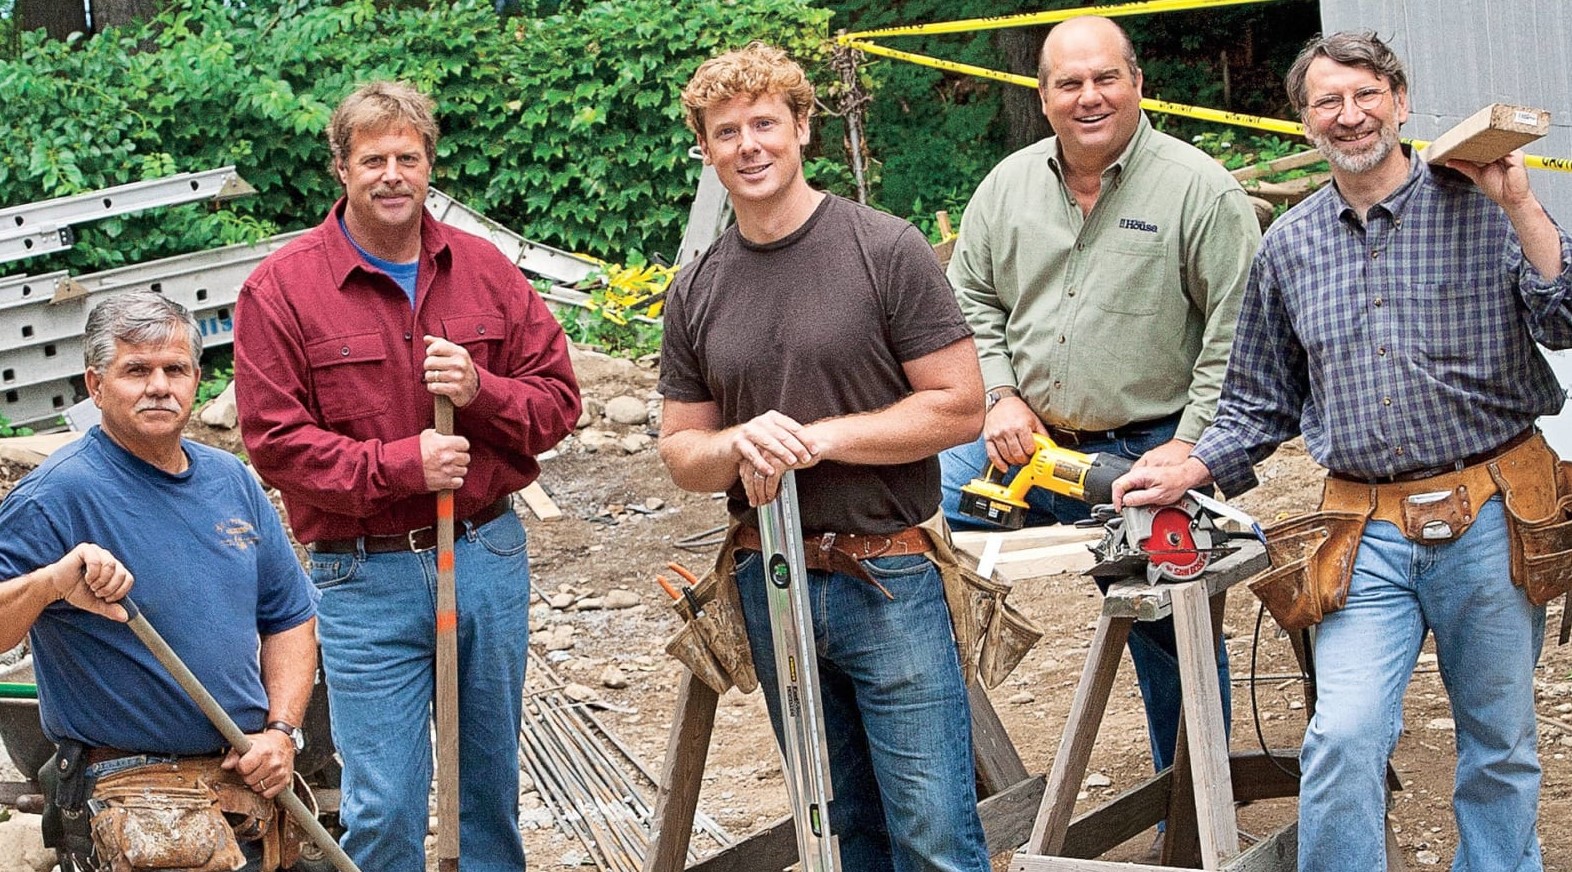 How To Get On A Home Repair Tv Show